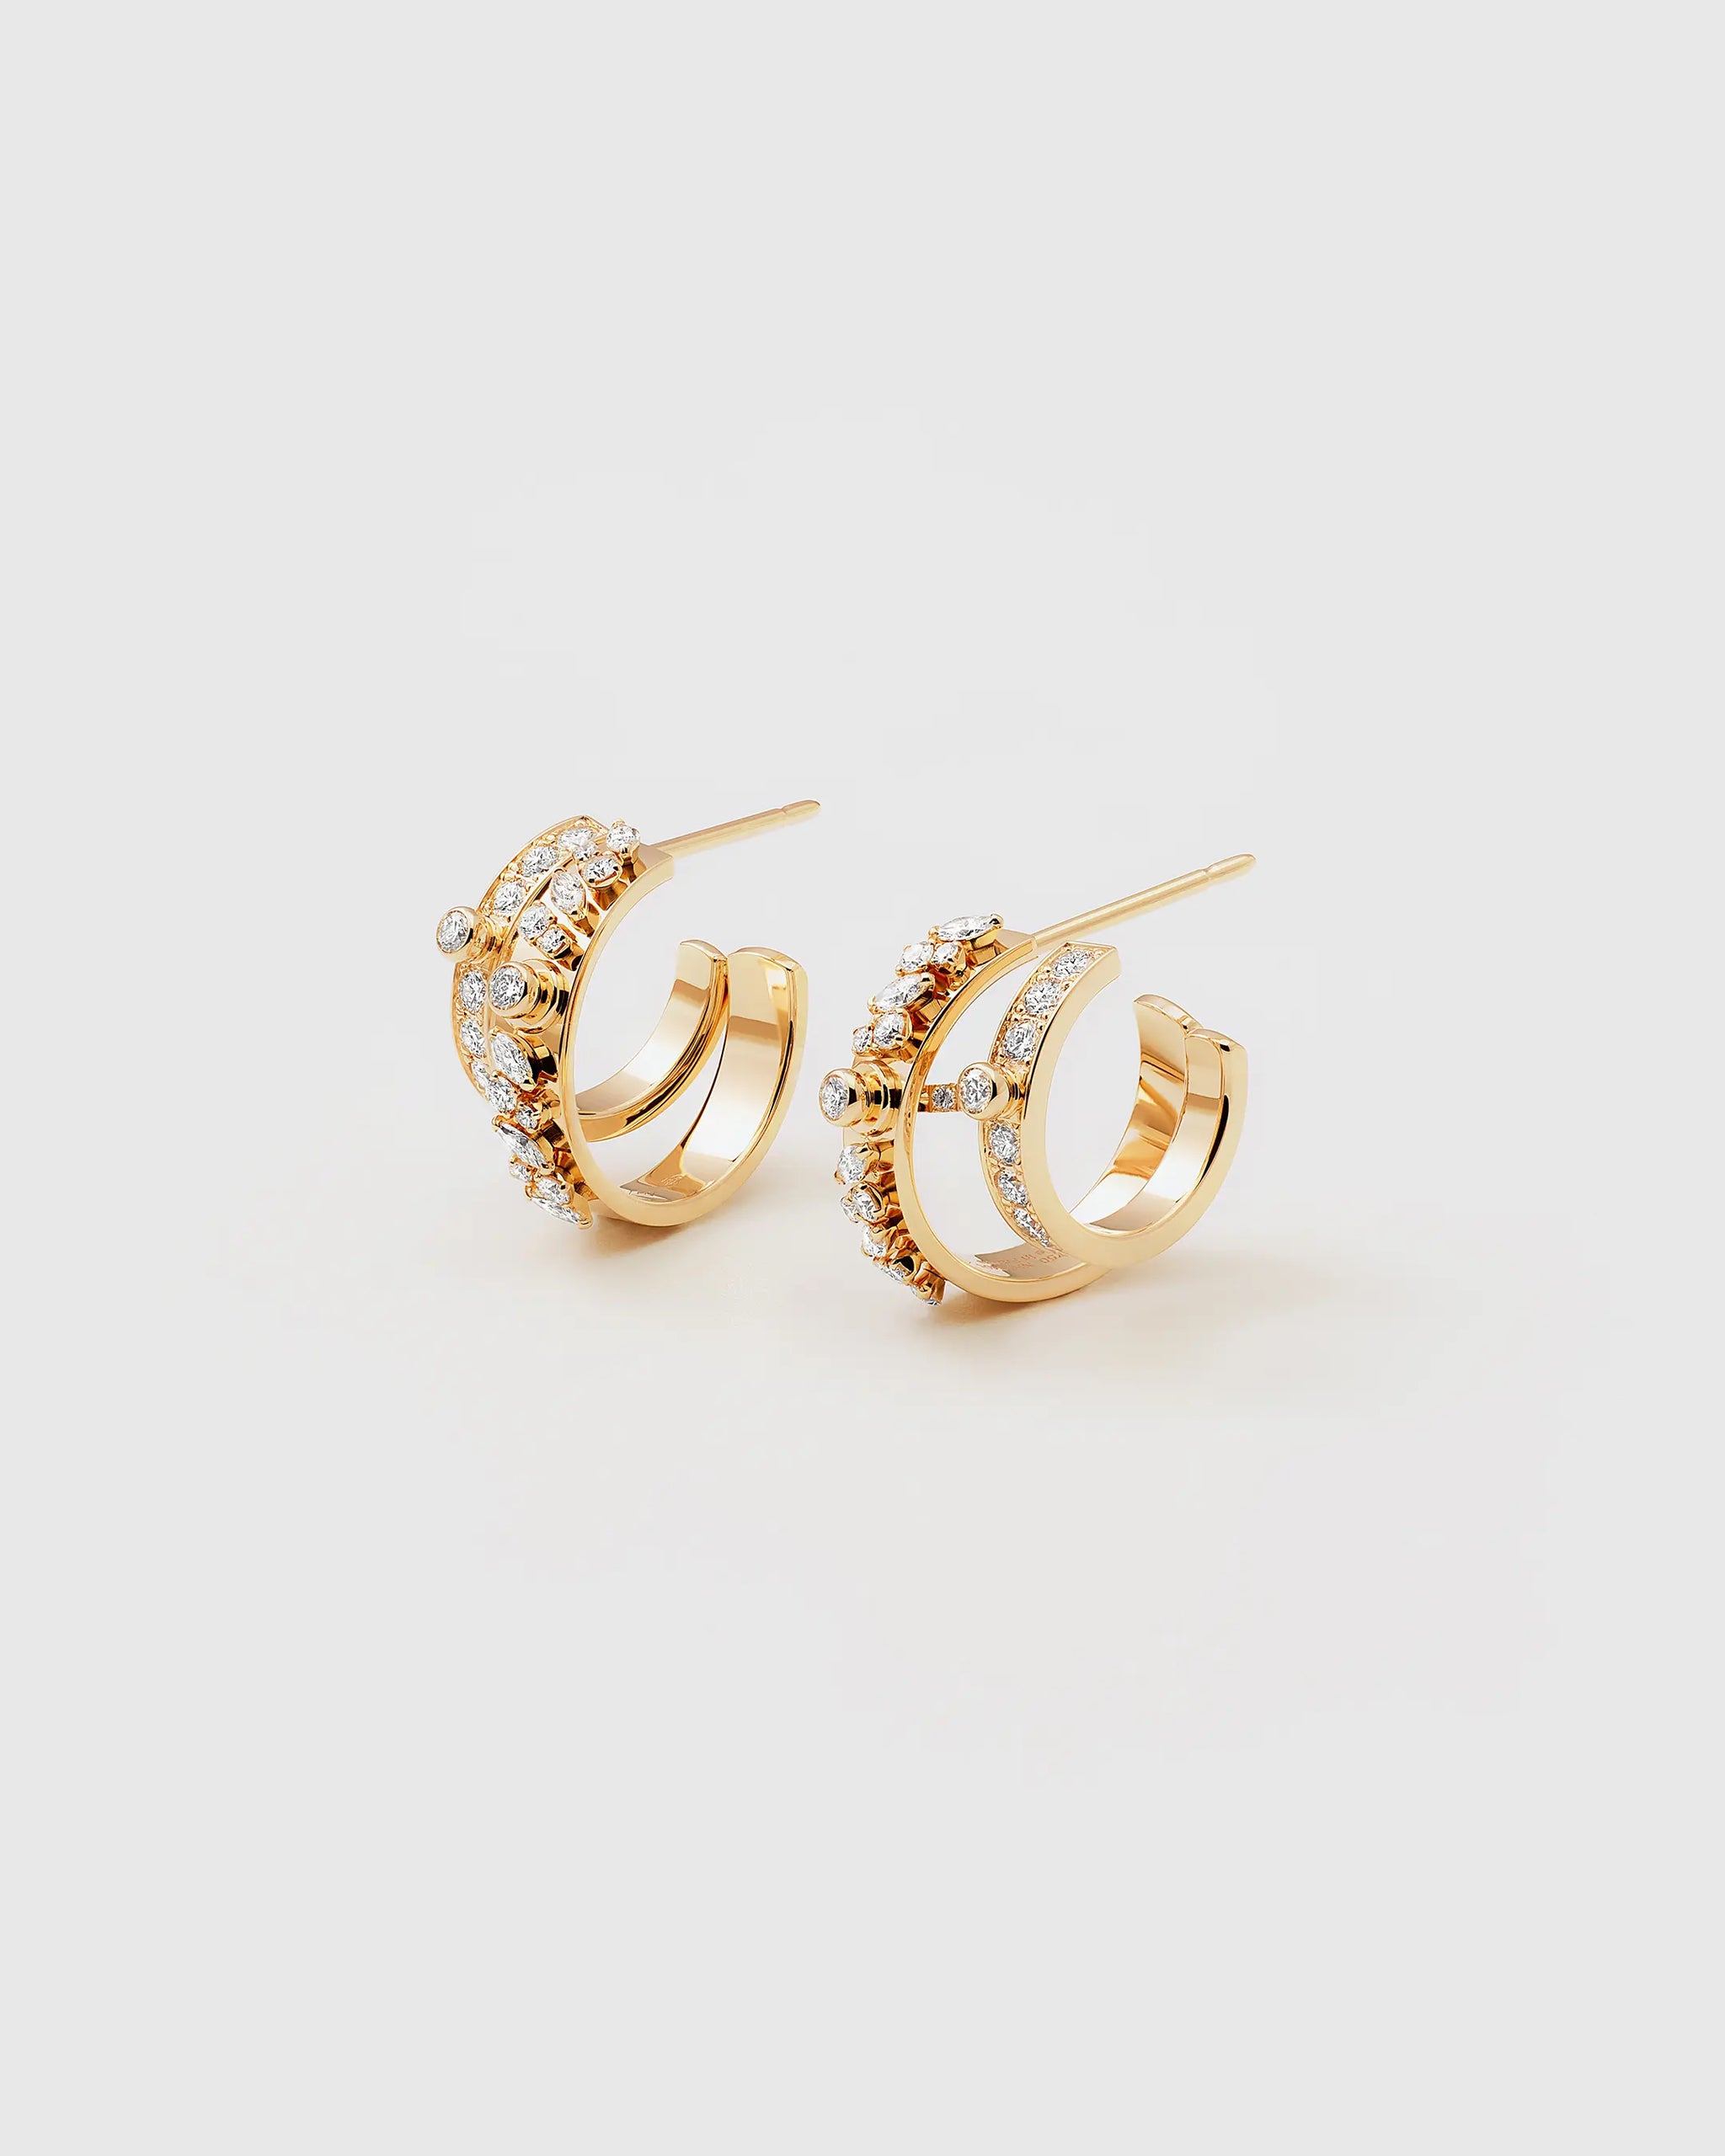 Under The Stars Mood Hoops in Yellow Gold - 1 - Nouvel Heritage